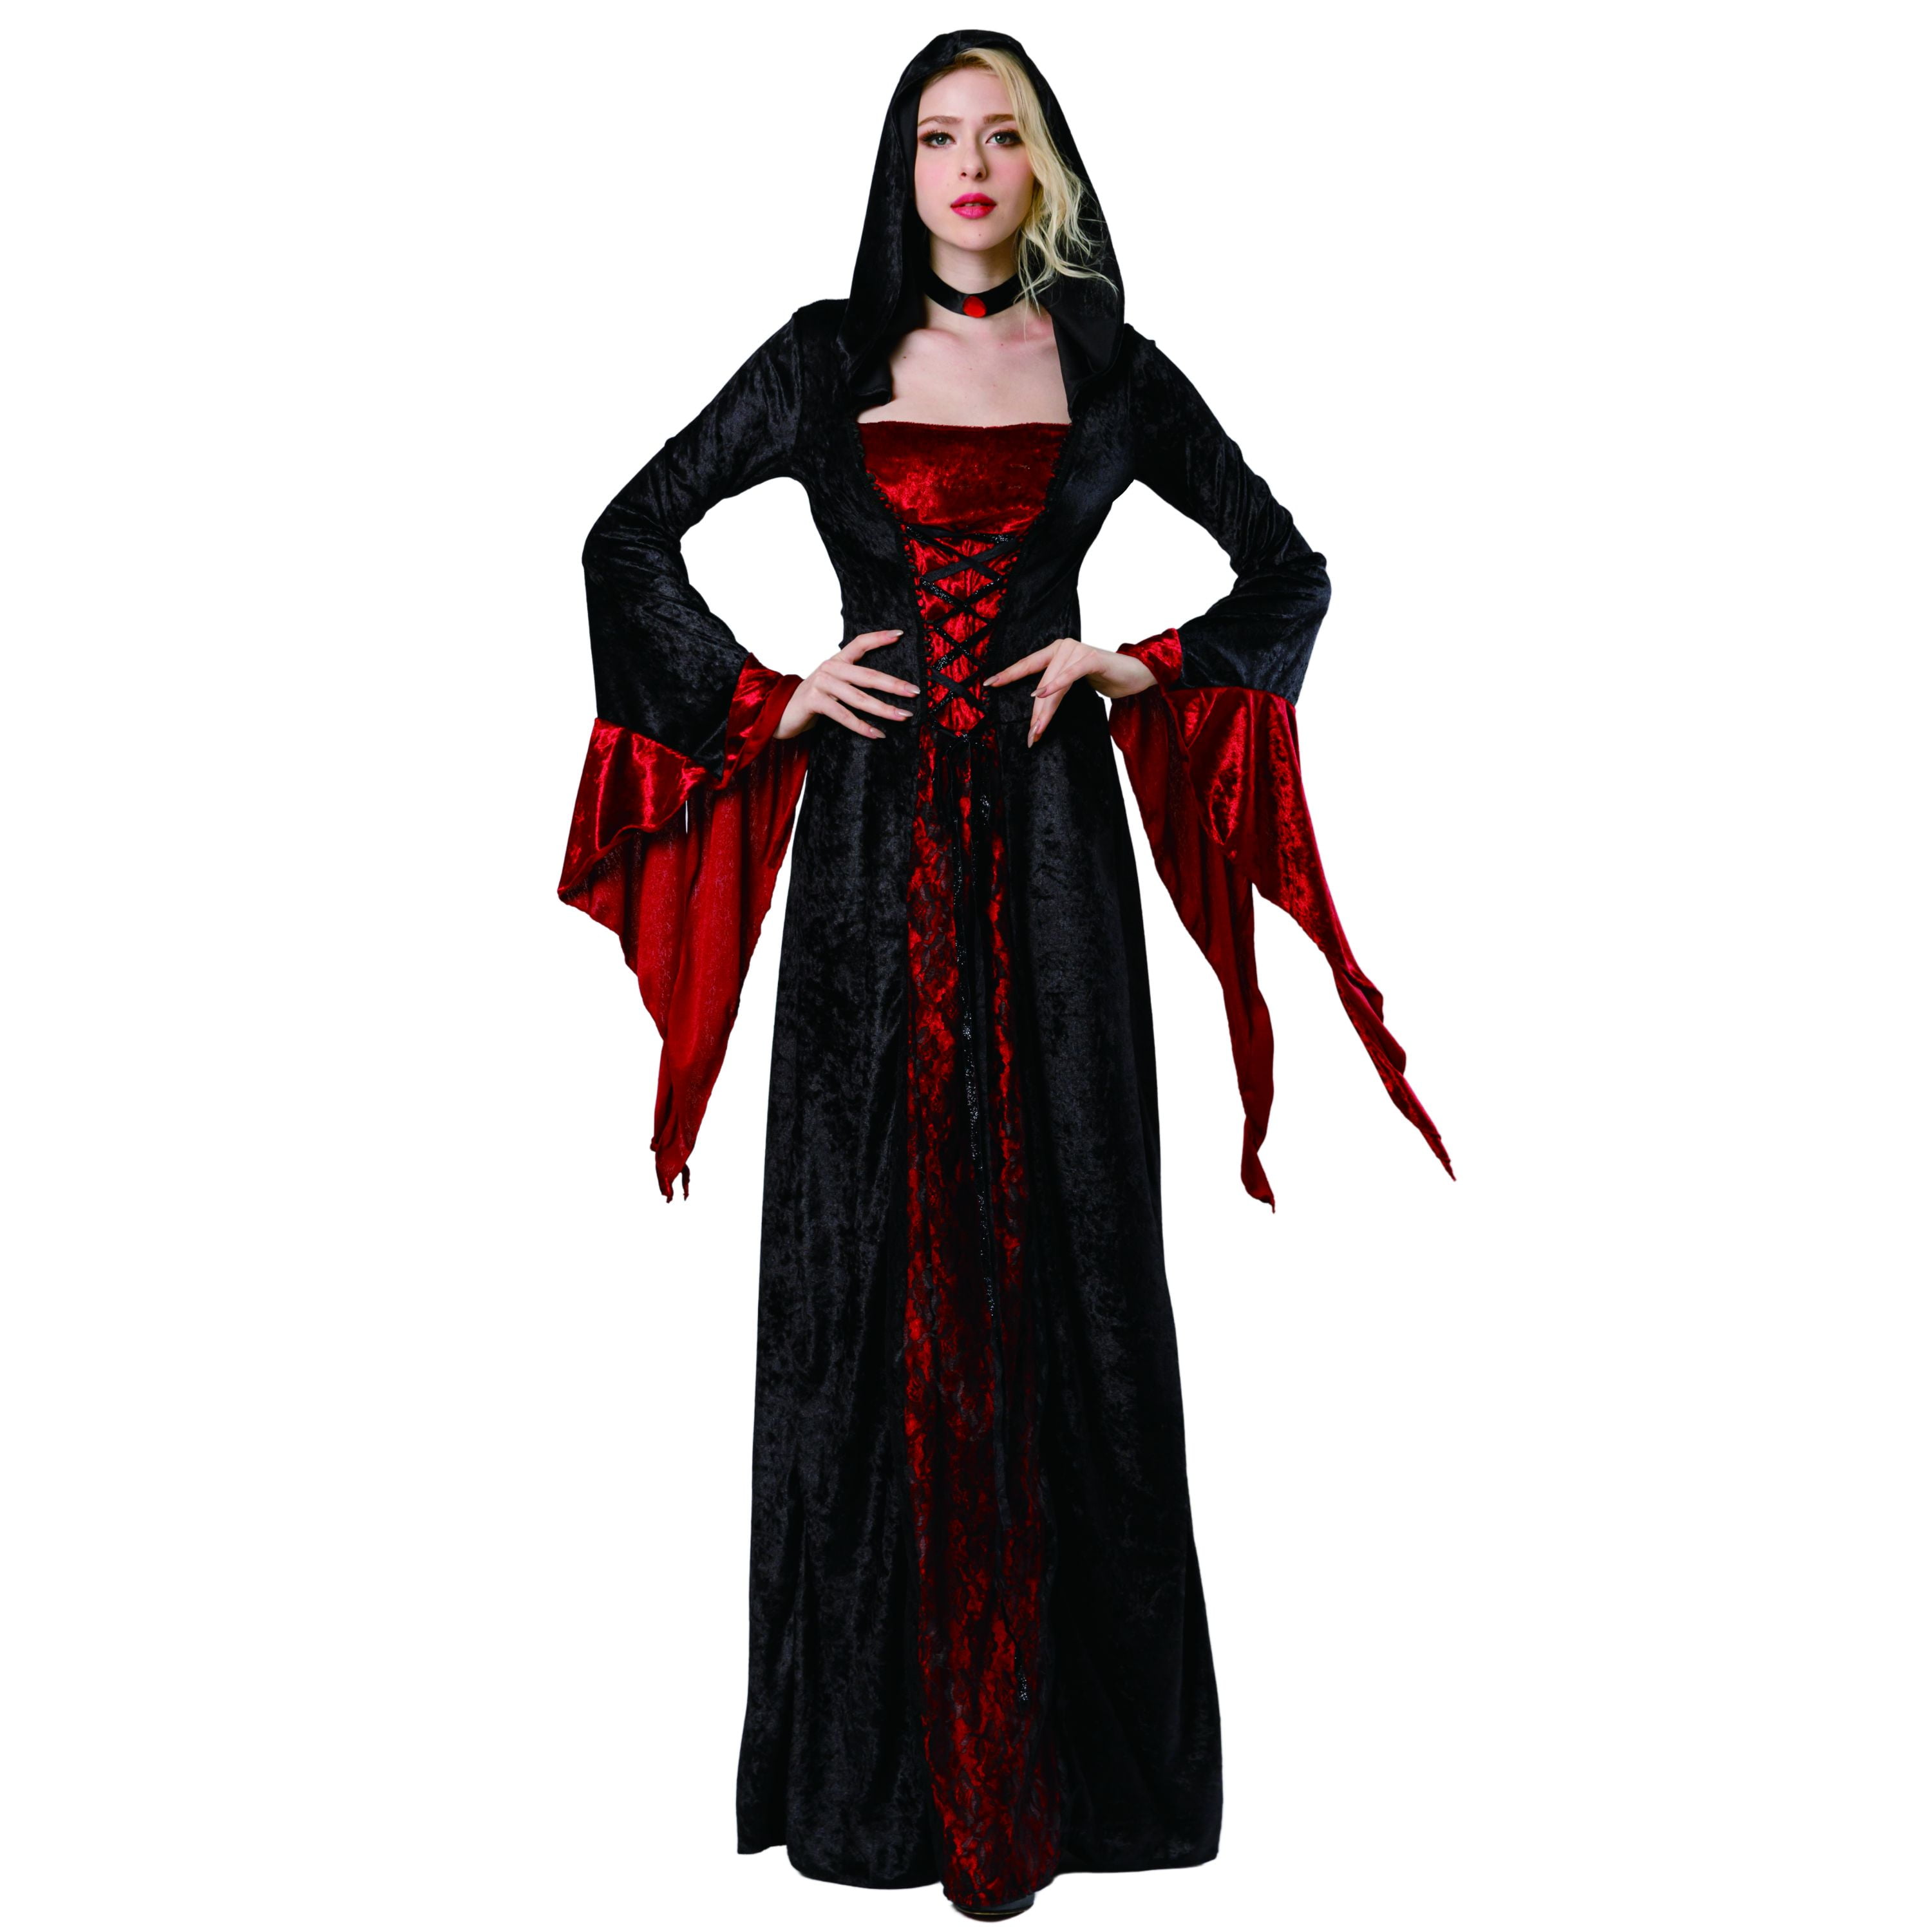 SALE! Plus Size Gothic Witchy / Vampiress / Vampire Bell Sleeve Gown Dress  Supersize Halloween Costume 1x 2x 3x 4x 5x 6x 7x 8x